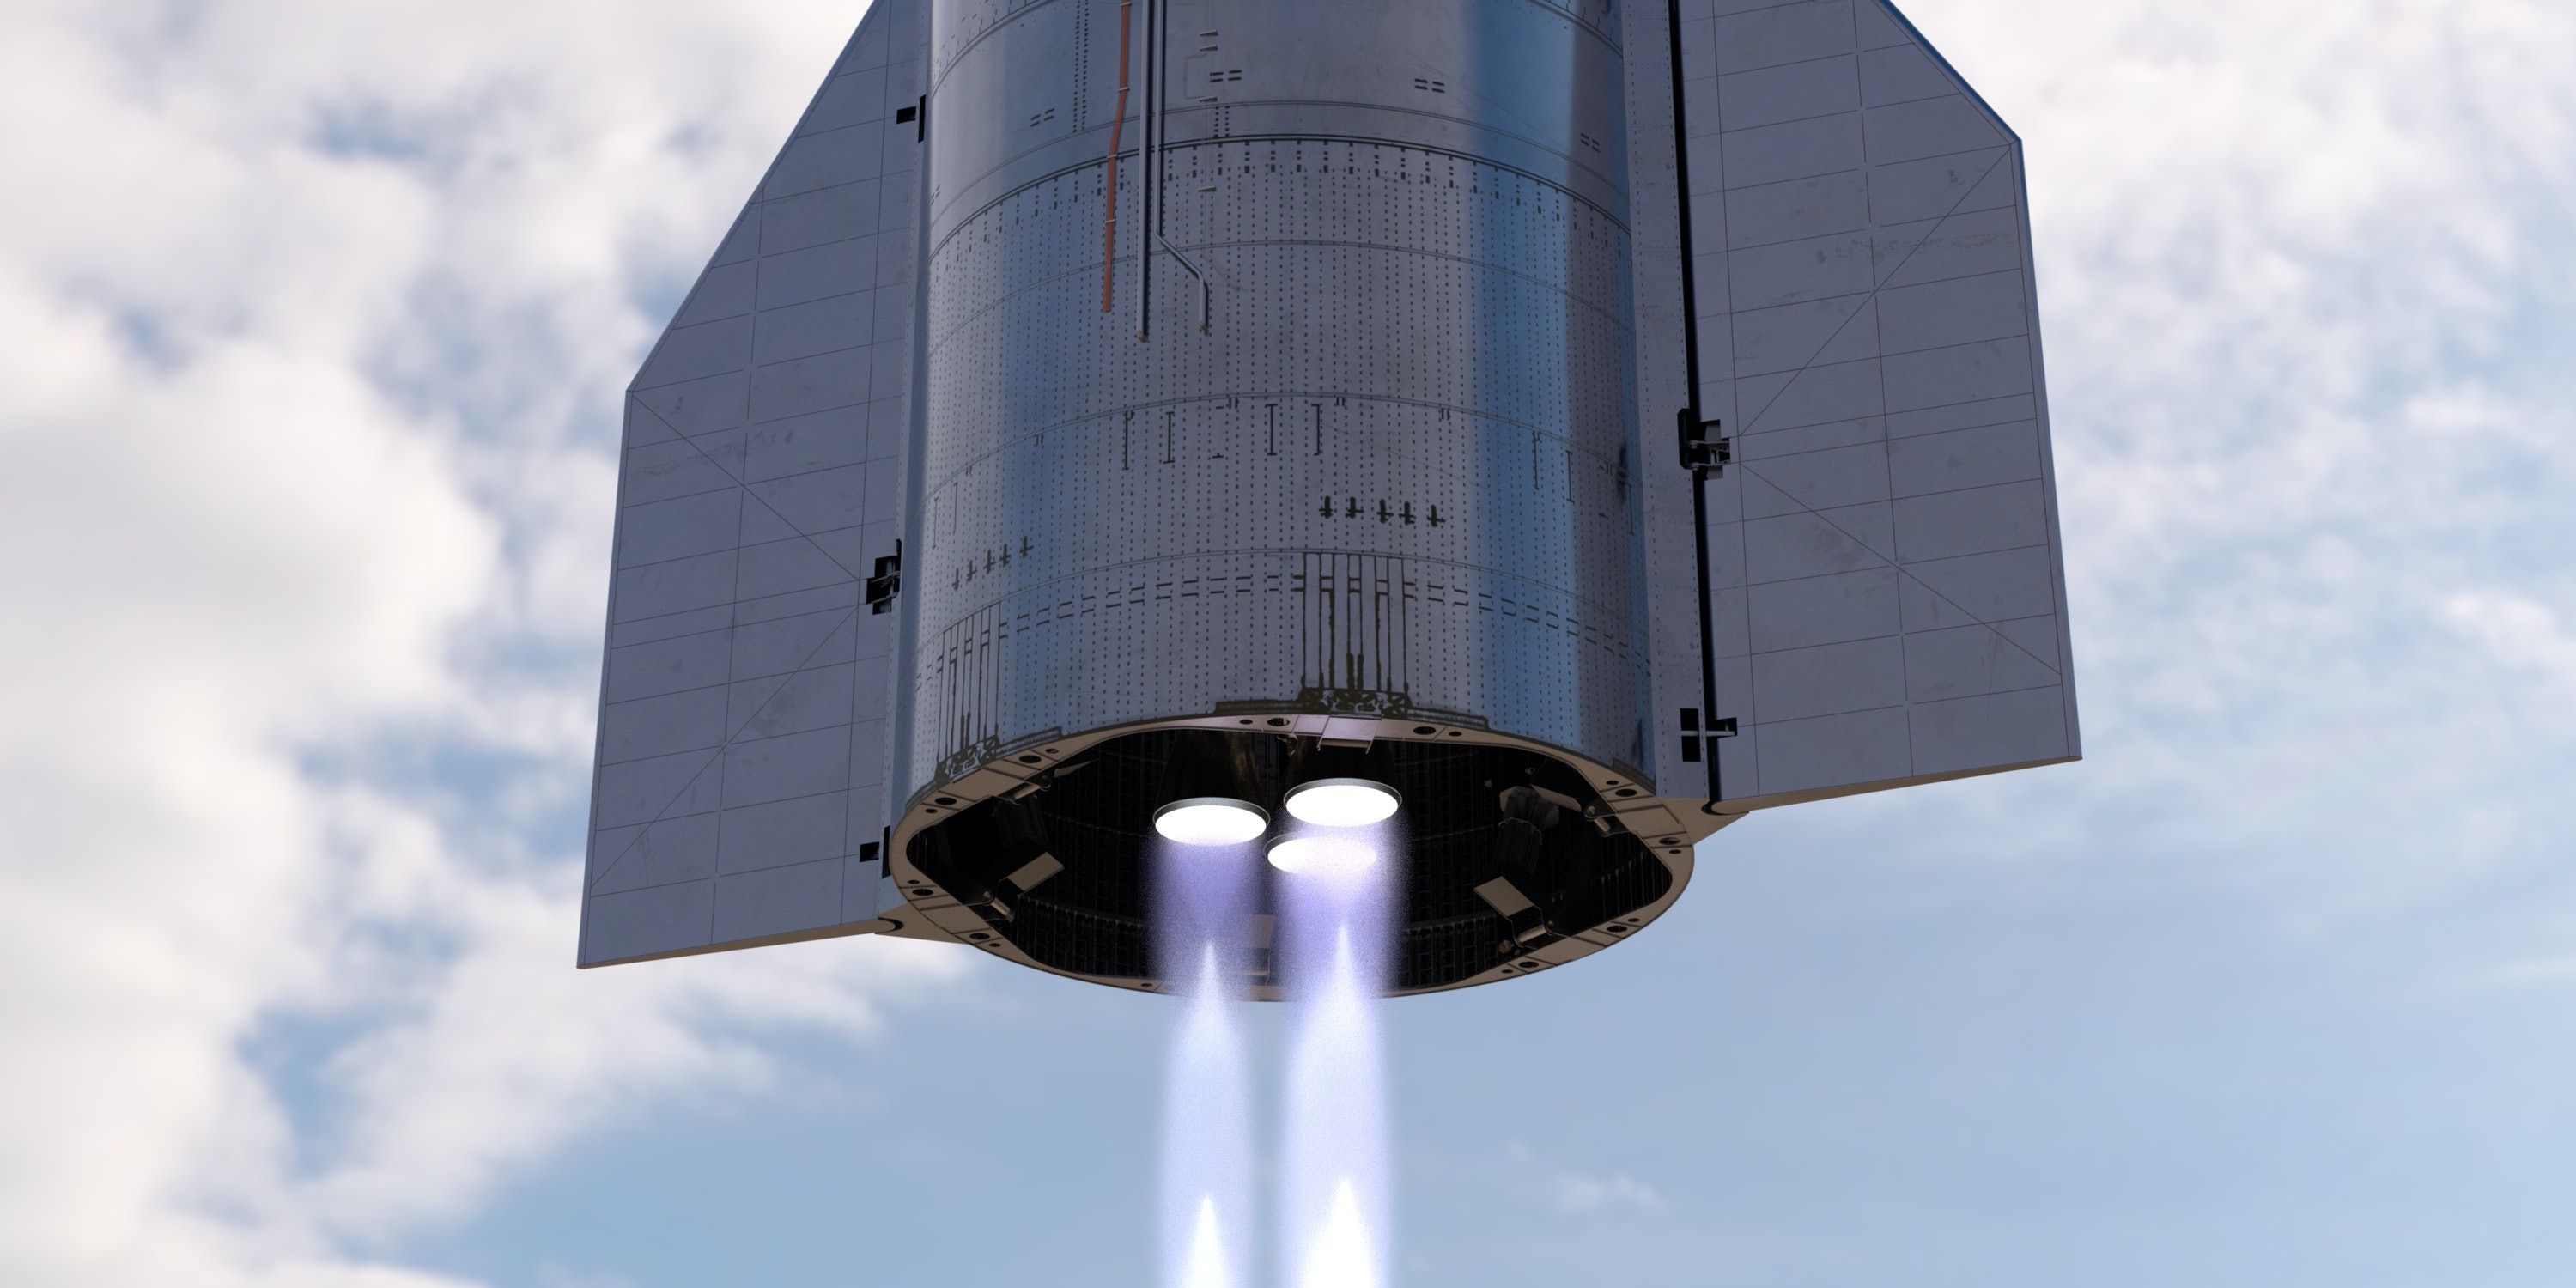 SpaceX Starship: Elon Musk responds to impressive render of future launch